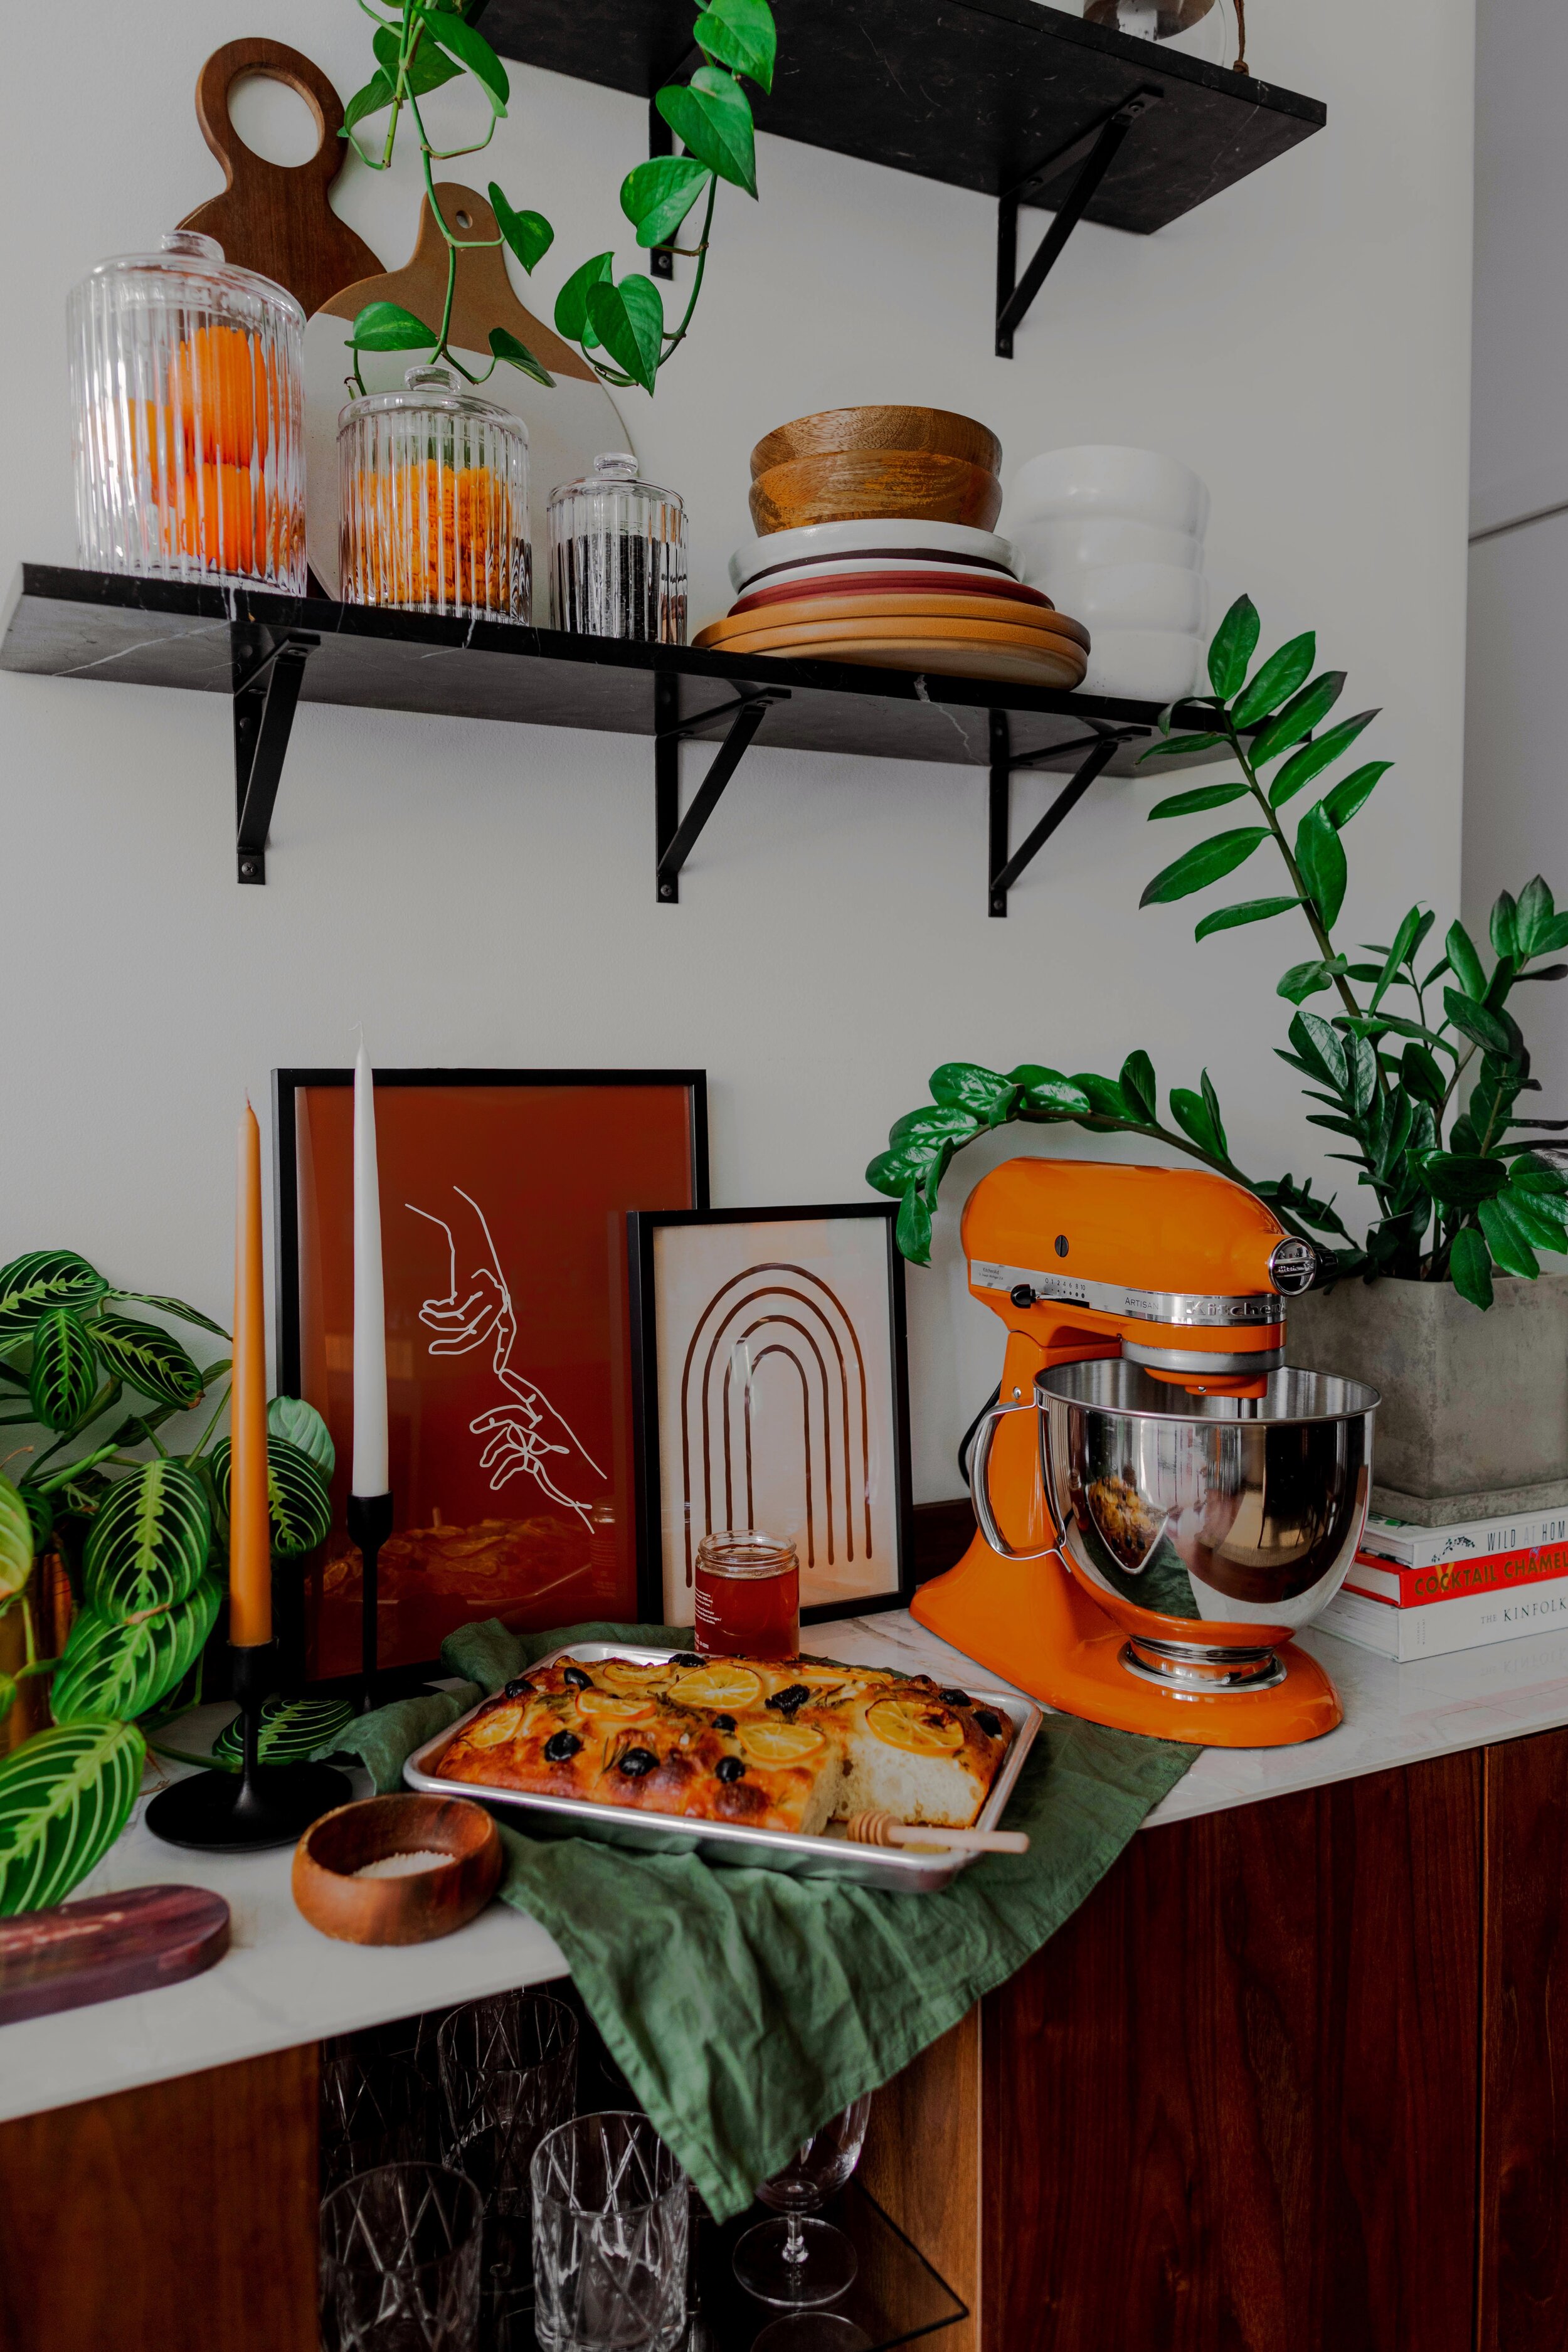 KitchenAid 2021 Color of the Year: The Color You Might Just Start